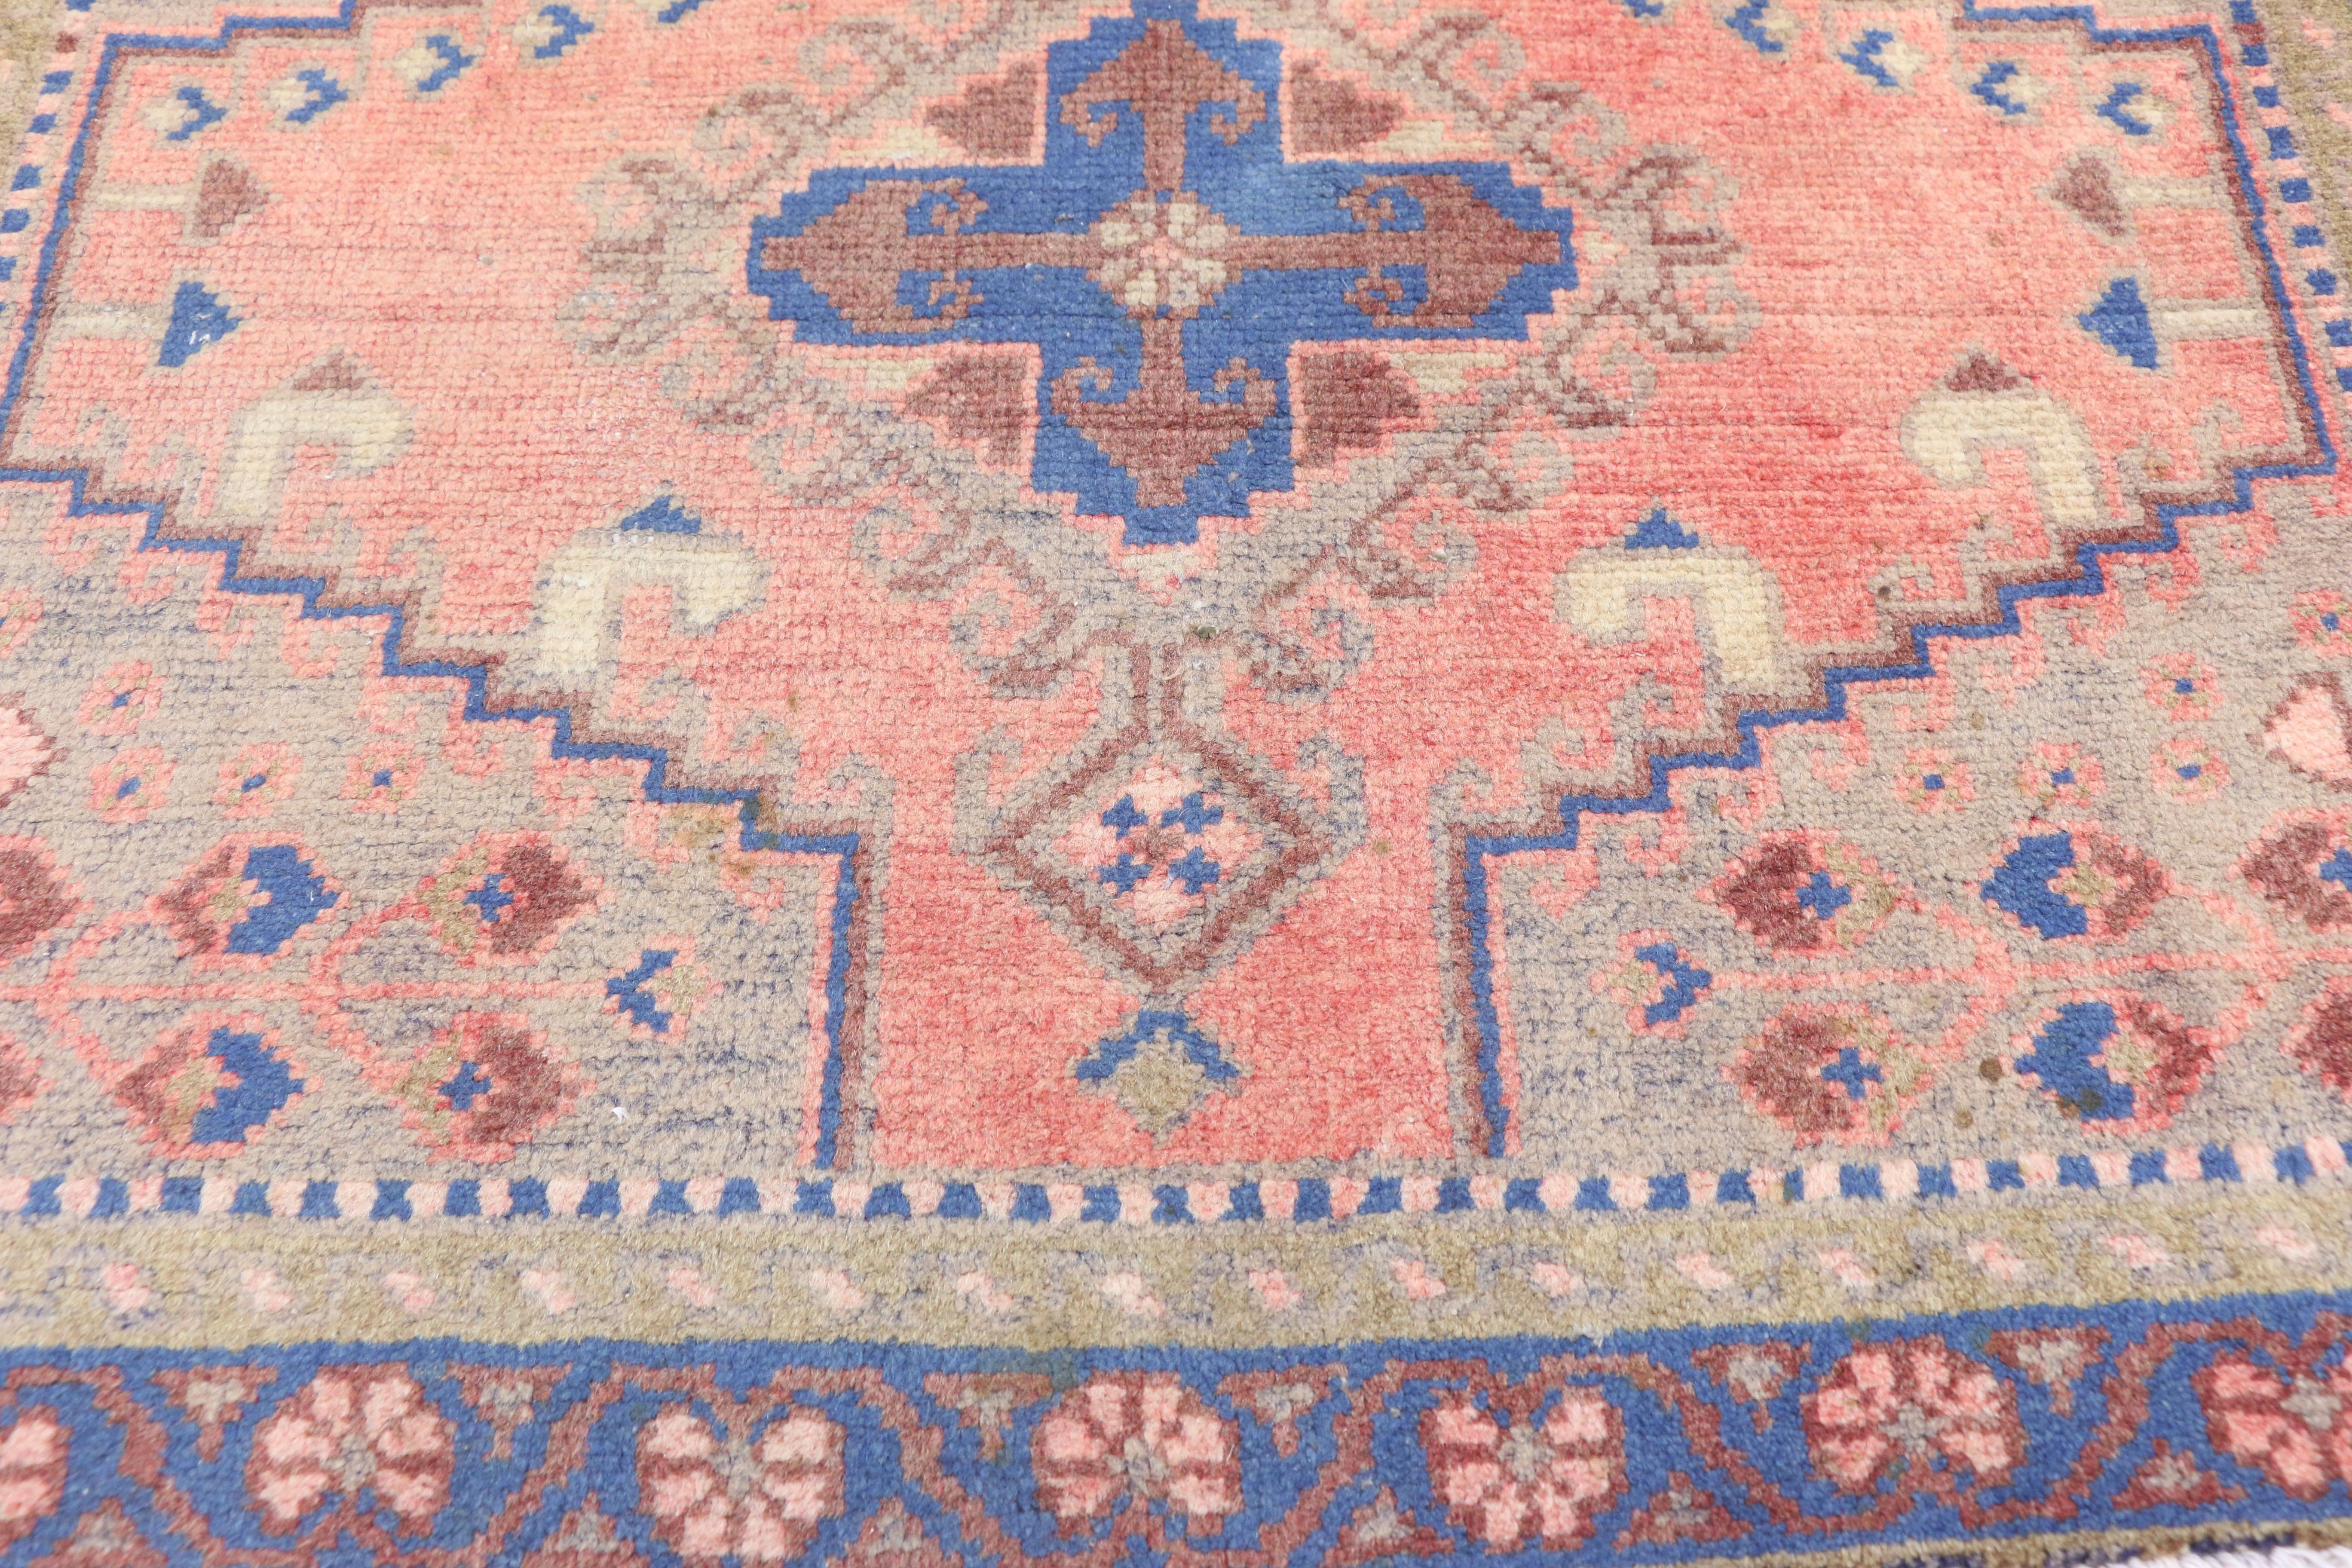 Vintage Persian Viss Accent Rug with Eclectic Bohemian Tribal Style In Good Condition For Sale In Dallas, TX